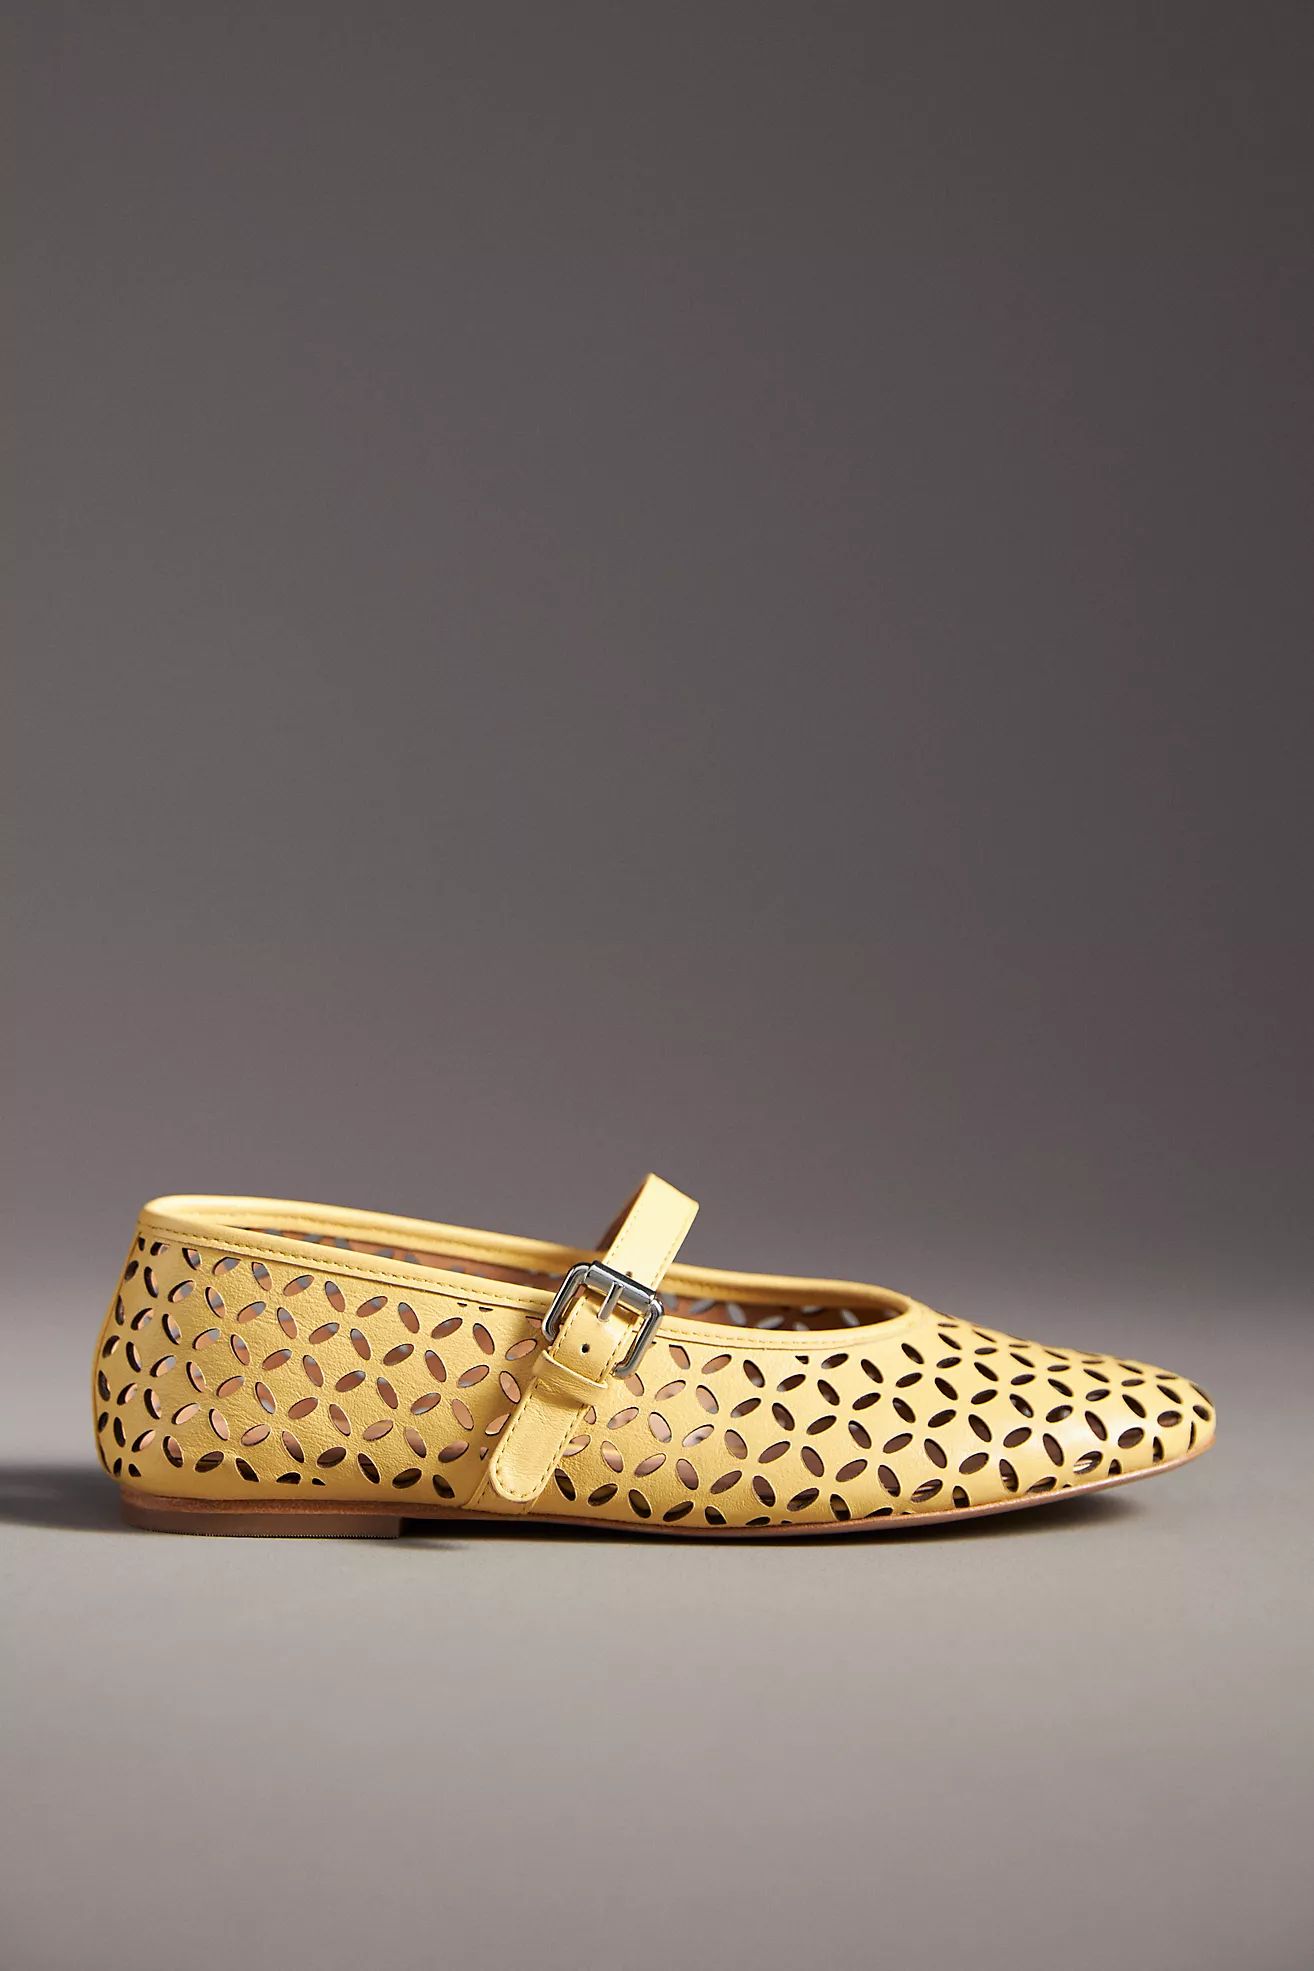 By Anthropologie Floral Cutout Flats | Anthropologie (US)